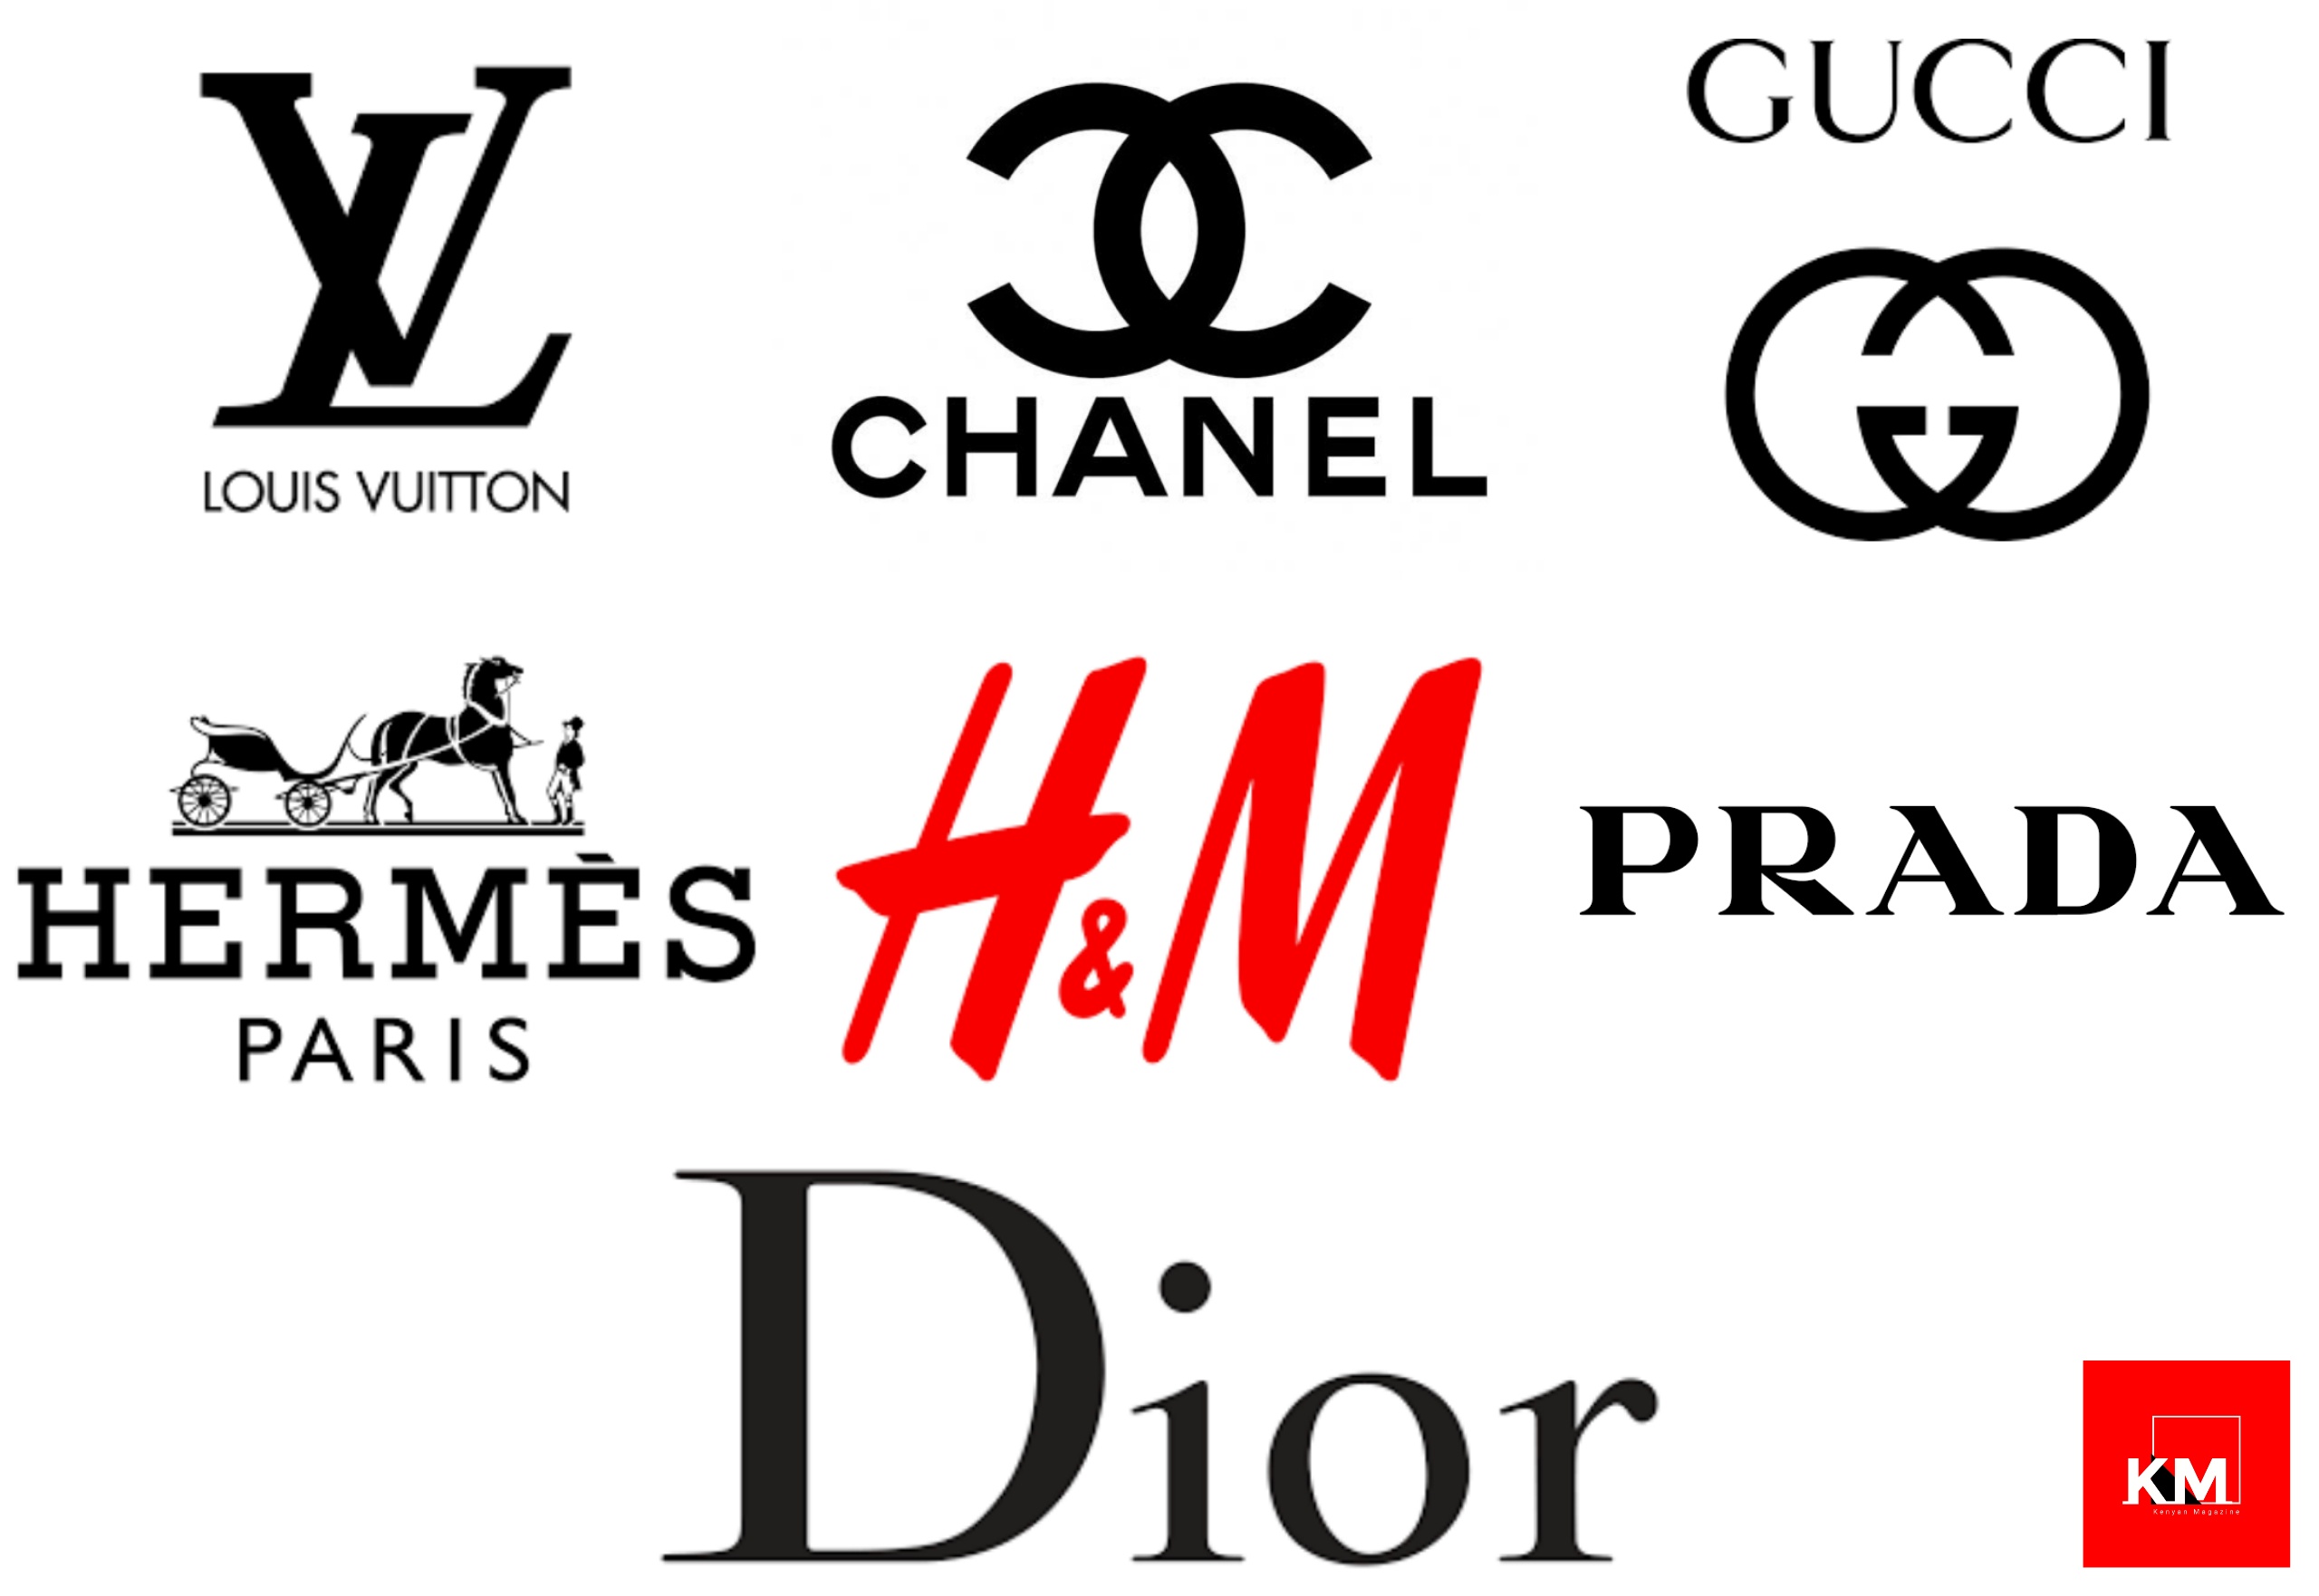 Top 25 Most Expensive Clothing Brands In The World 2022 Kenyan Magazine